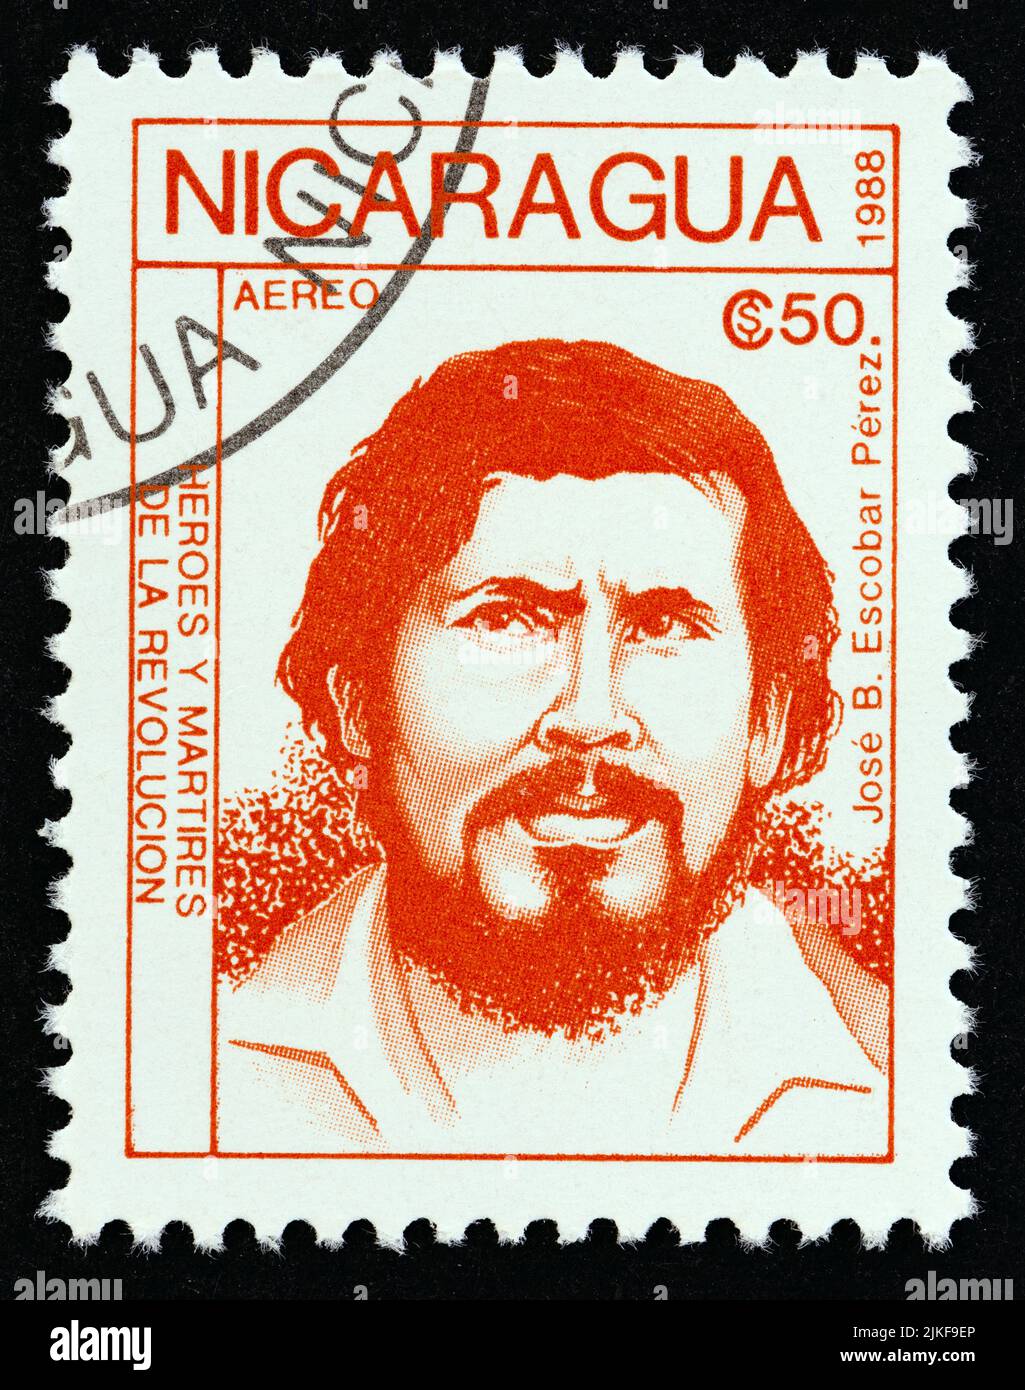 NICARAGUA - CIRCA 1988: A stamp printed in Nicaragua from the 'Revolutionaries' issue shows Jose B. Escobar Perez, circa 1988. Stock Photo